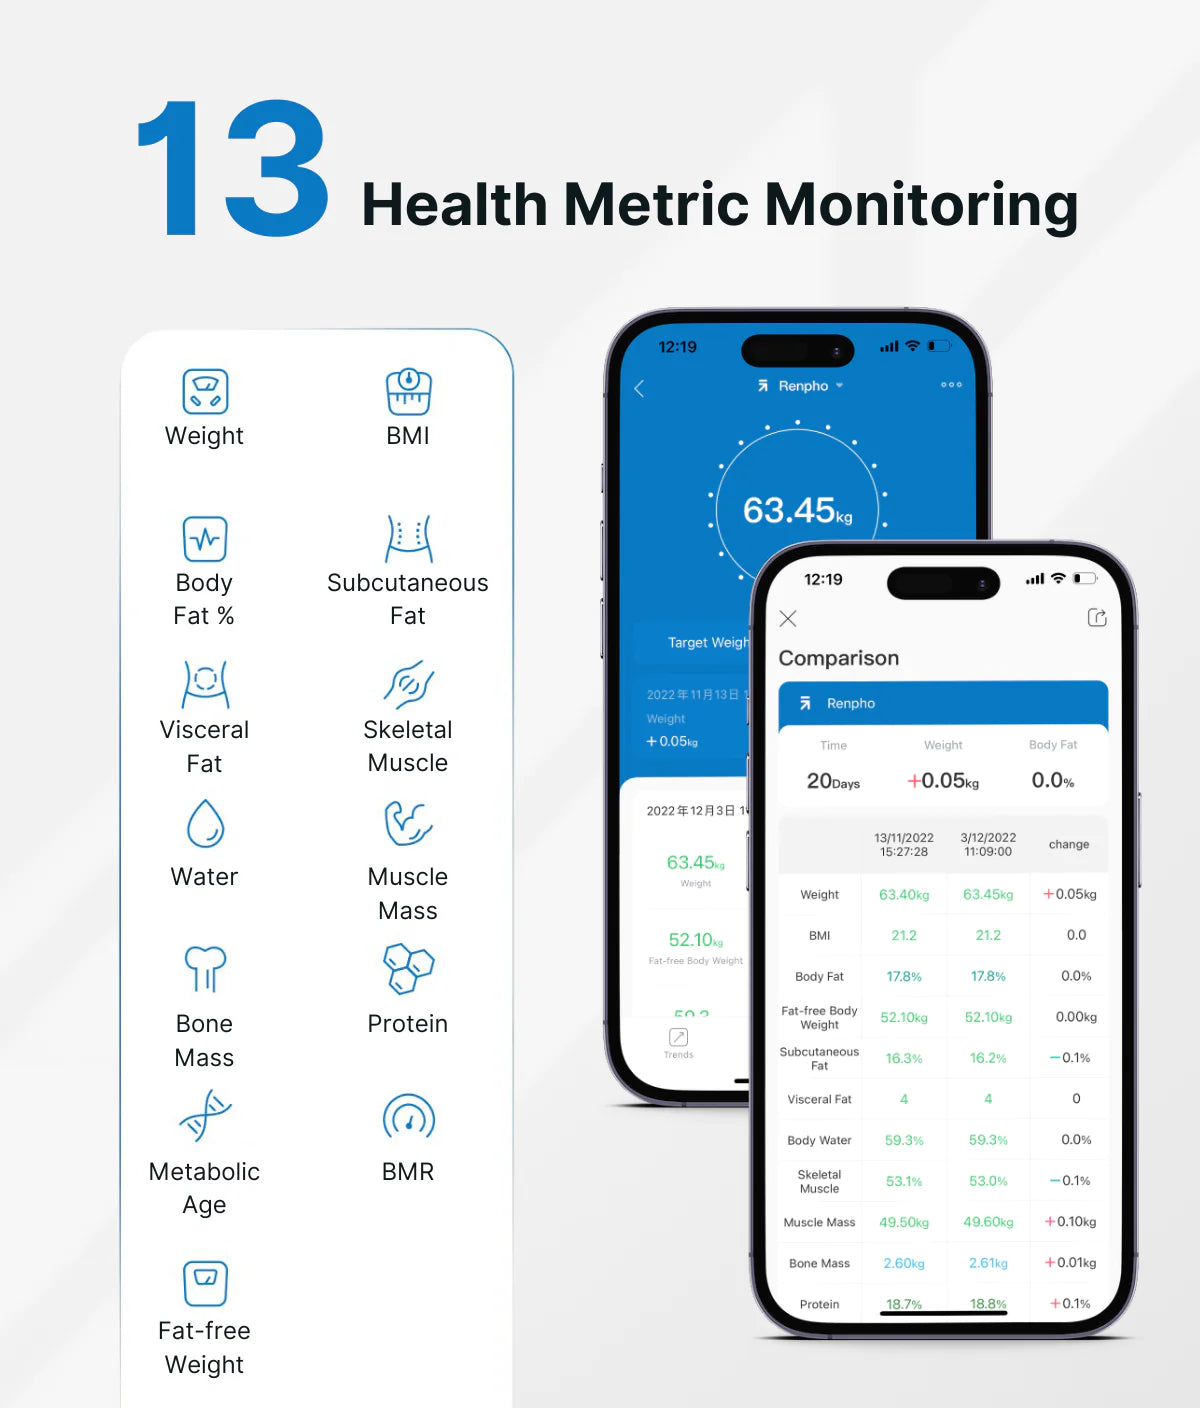 This image shows a smartphone app interface titled "health and fitness metric monitoring" that tracks various body metrics. Three phone screens display different graphs and numeric data, including weight, BMI, body fat, muscle using the Renpho EU Elis Solar Smart Body Scale.